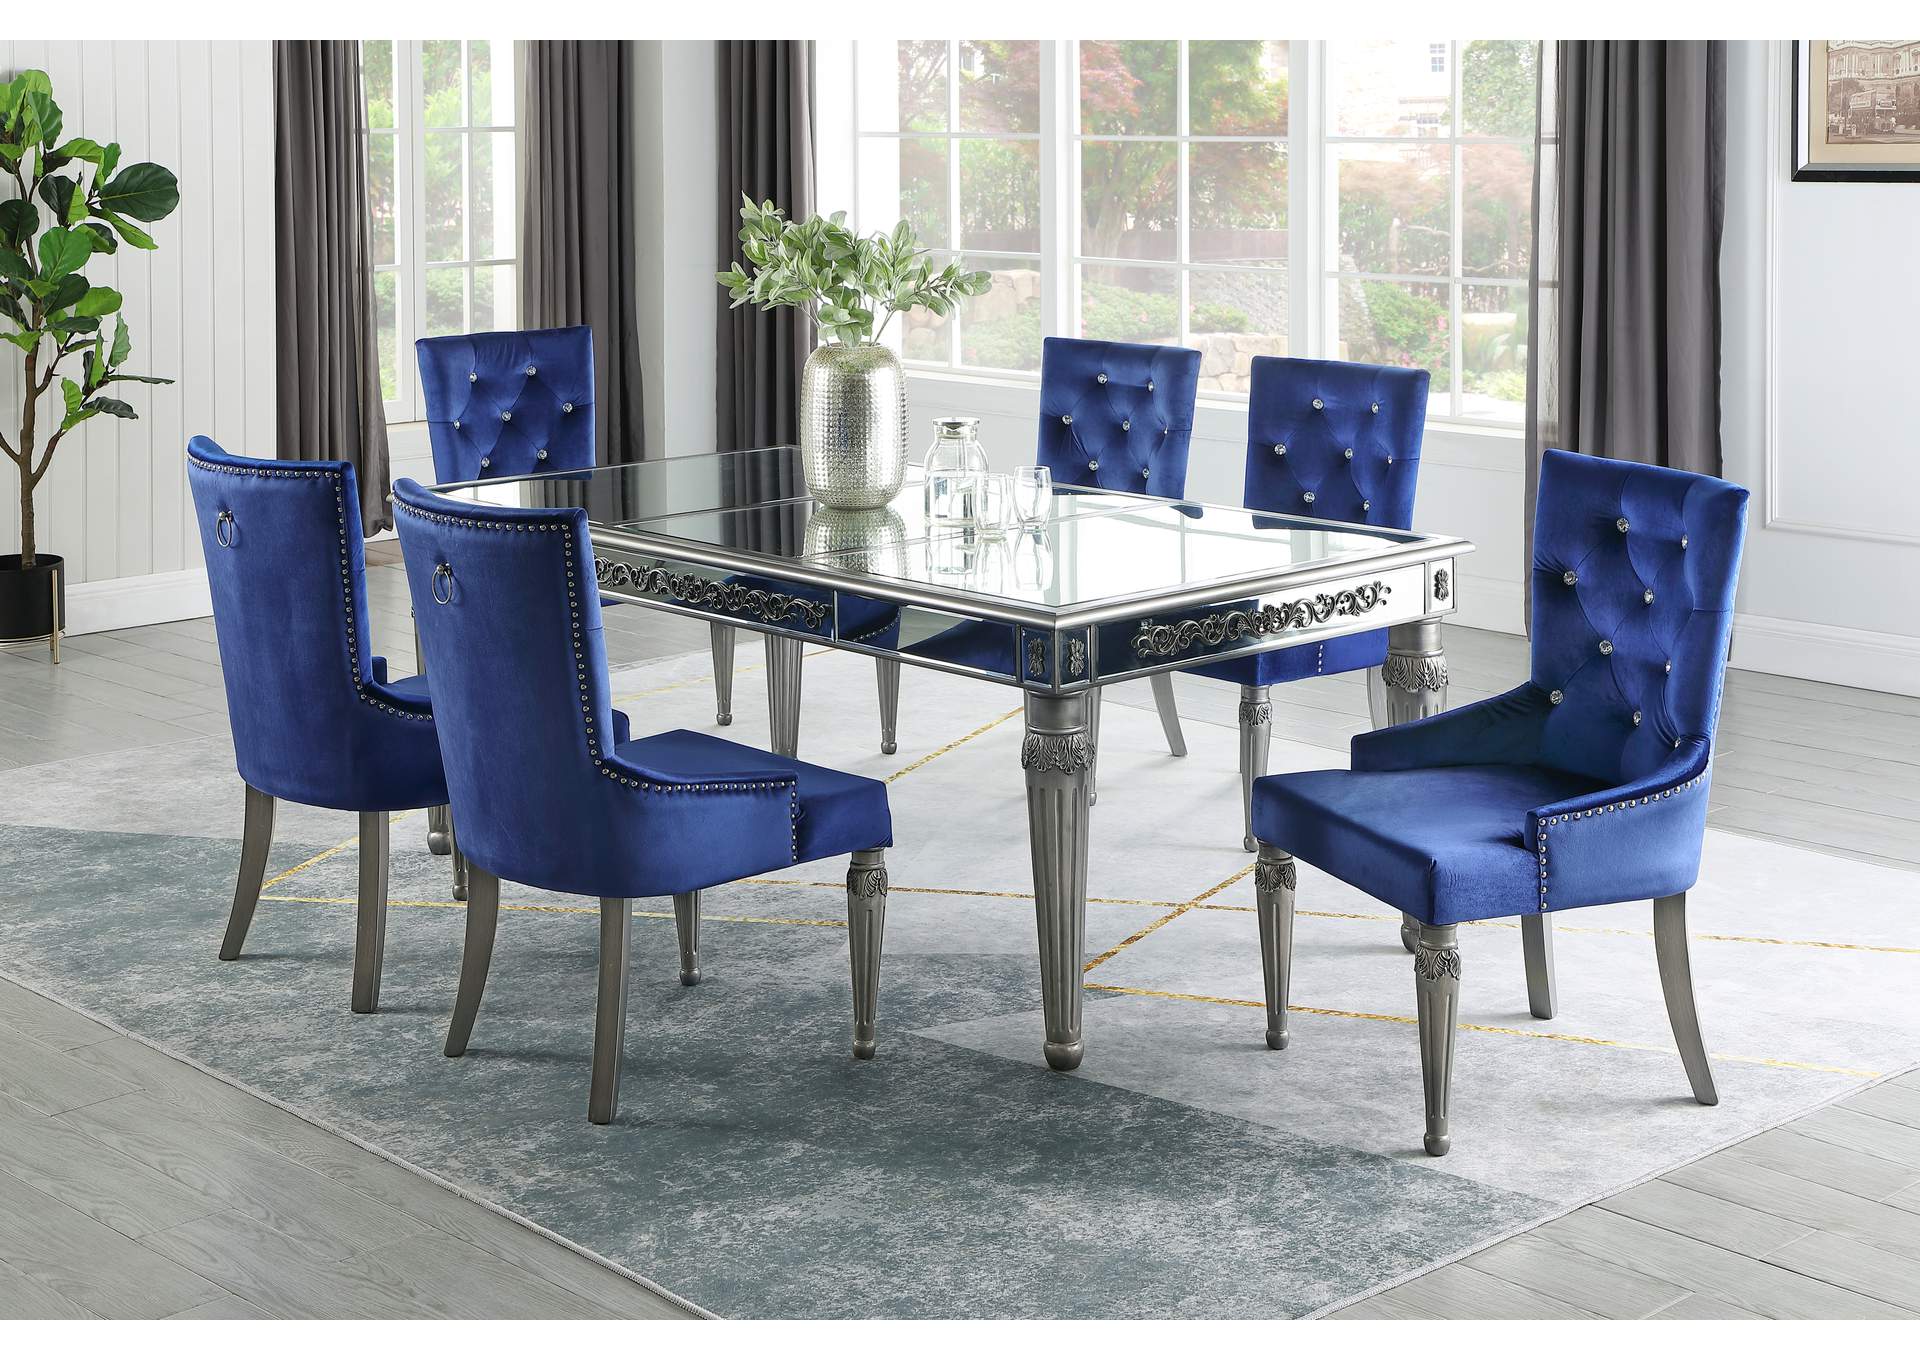 Queen Silver Silver & Blue 7 Piece Dining Set -Table W/ 6 Side Chairs,Cosmos Furniture